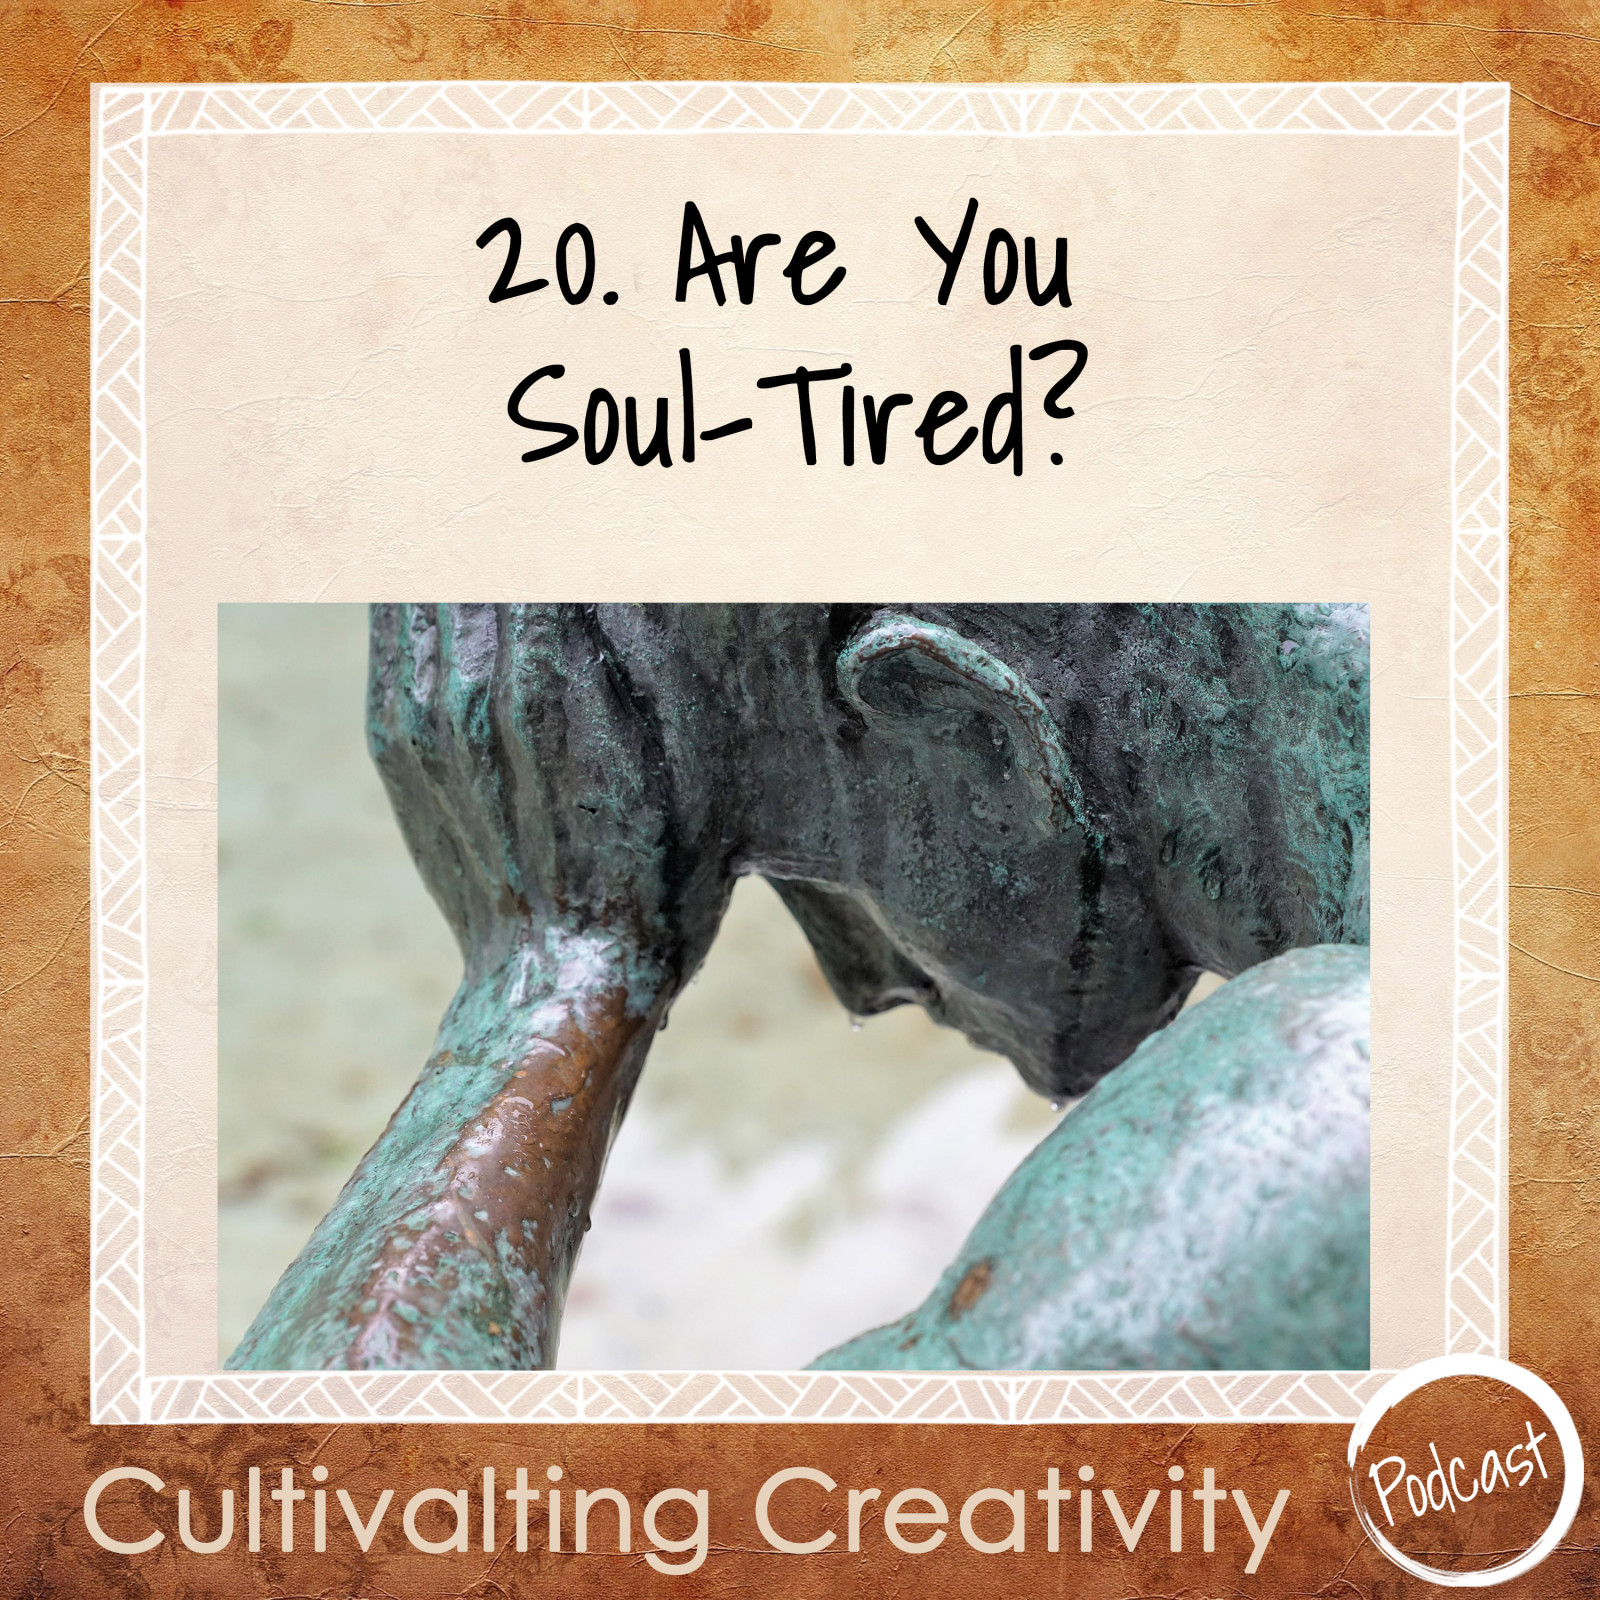 20. Are You Soul-Tired?